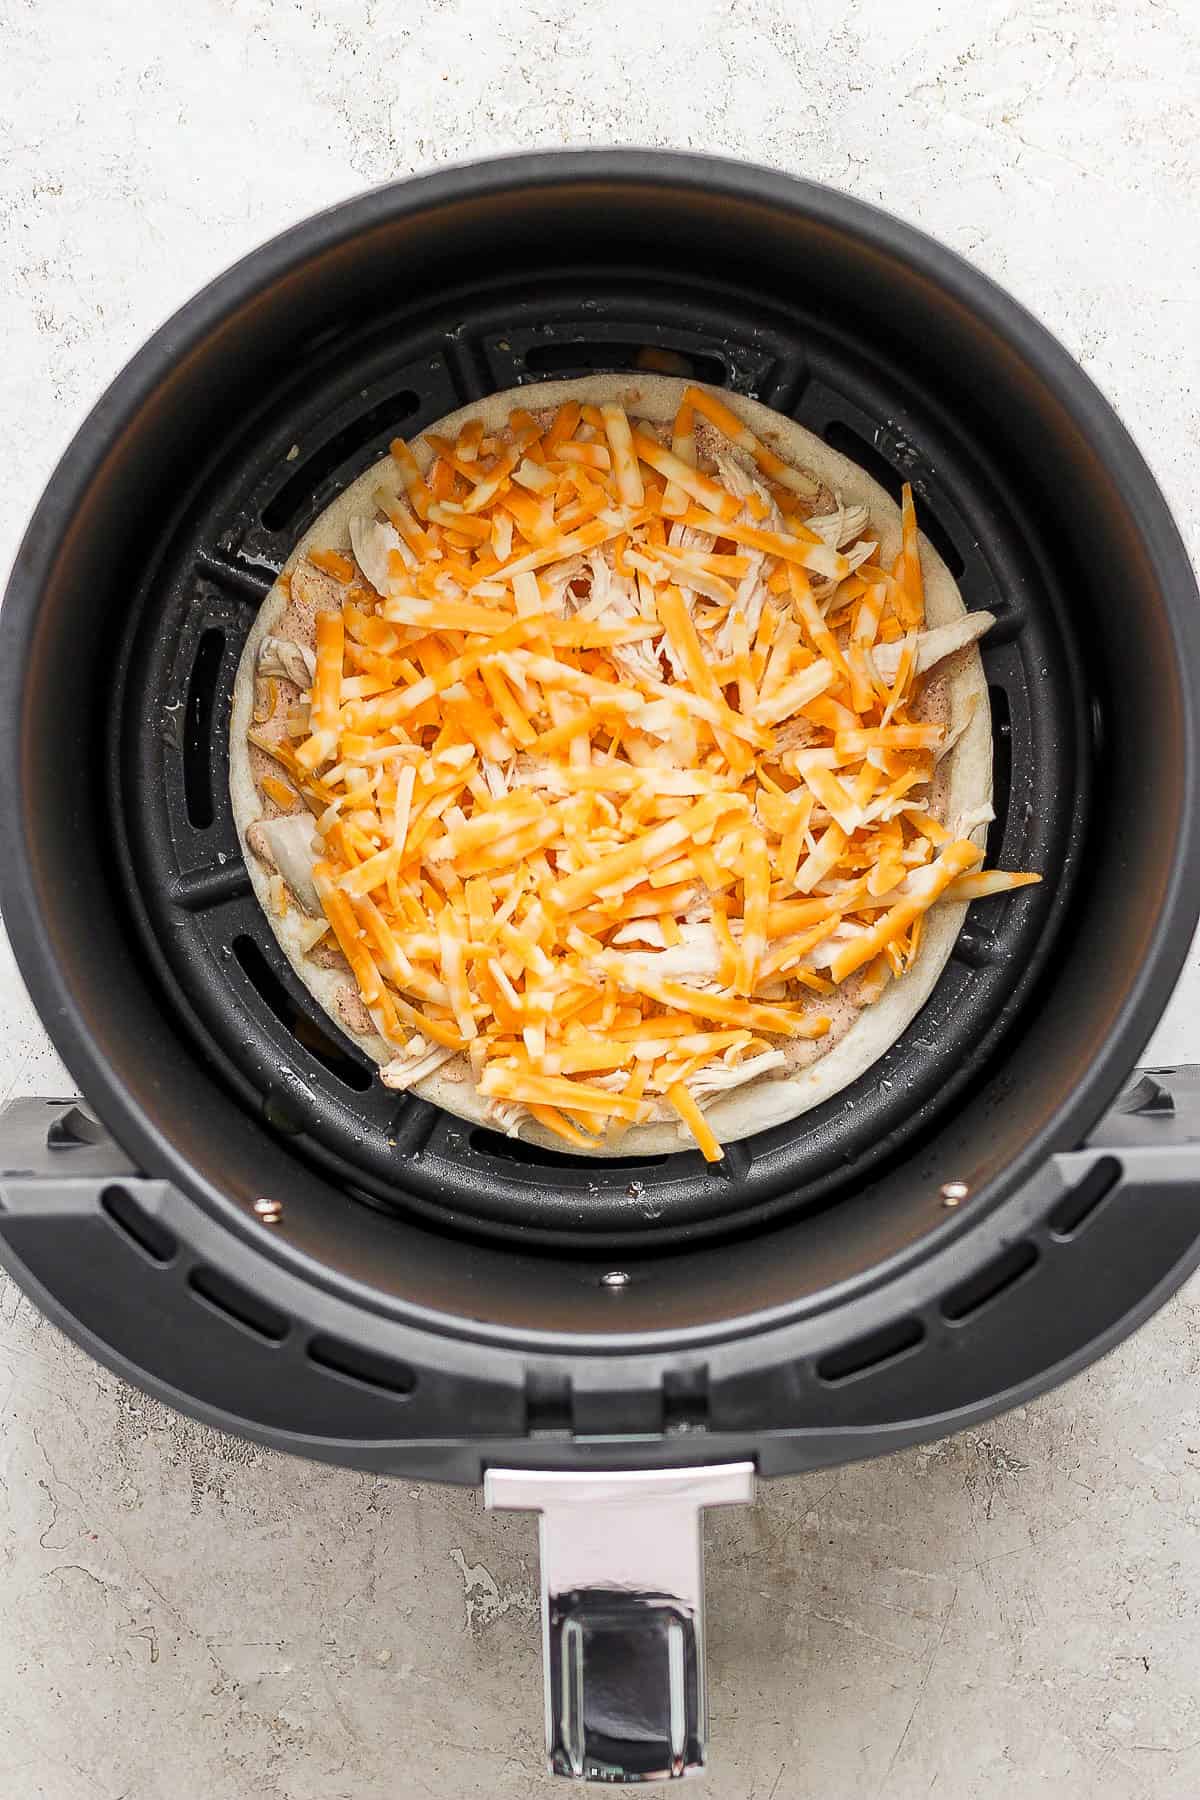 Shredded chicken, shredded cheese, and a chili lime sauce on a flour tortilla sitting in an air fryer for quesadillas.